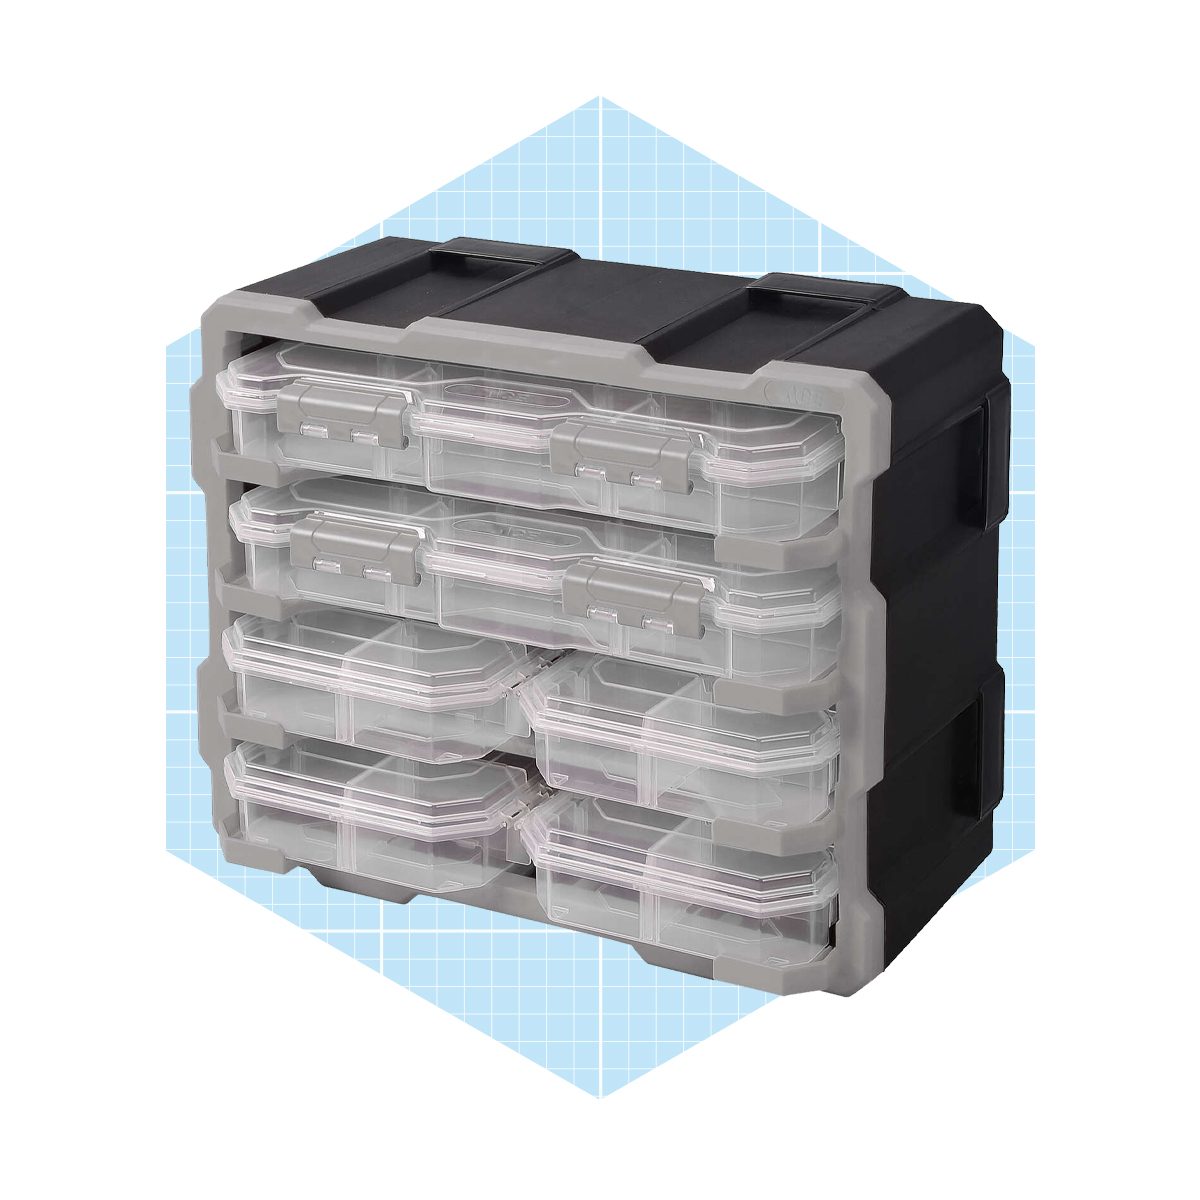 Ideal Security Inc Tilt Bins, 6 Plastic Storage Bins, Stackable Organizer for Everything from DIY to Crafts, Gray